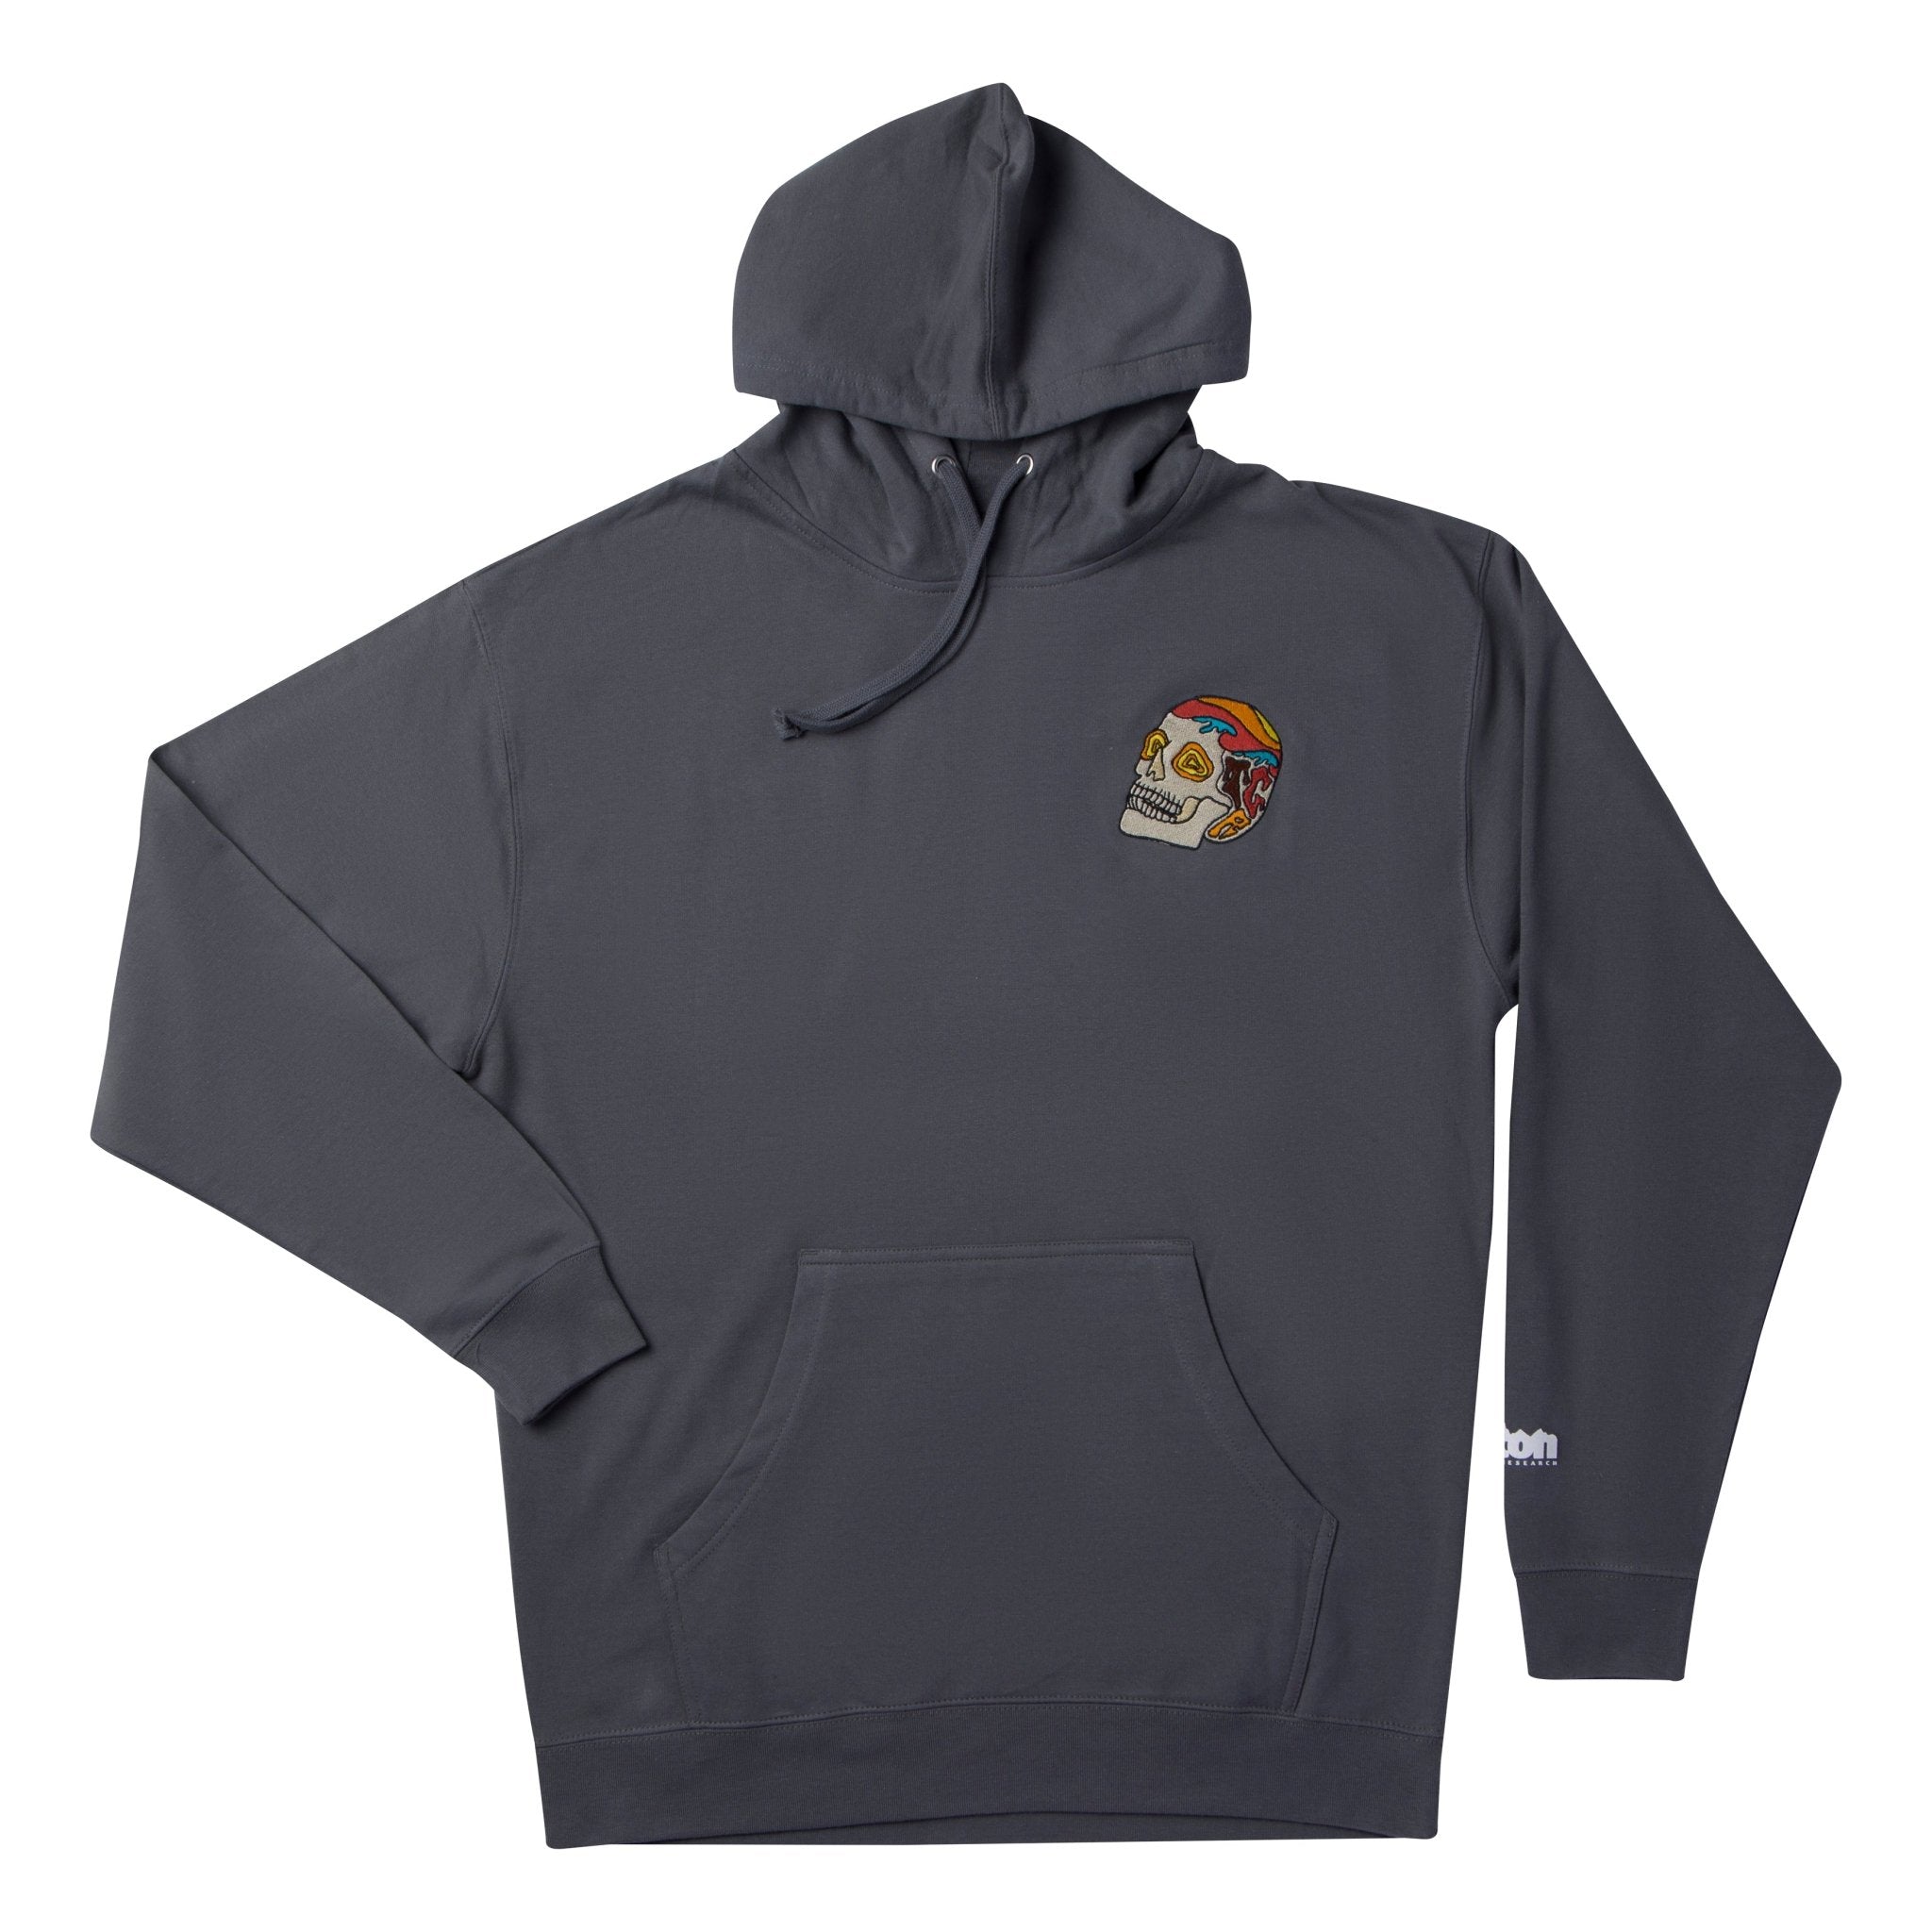 Swell Skull Embroidered Hoodie - Teton Gravity Research